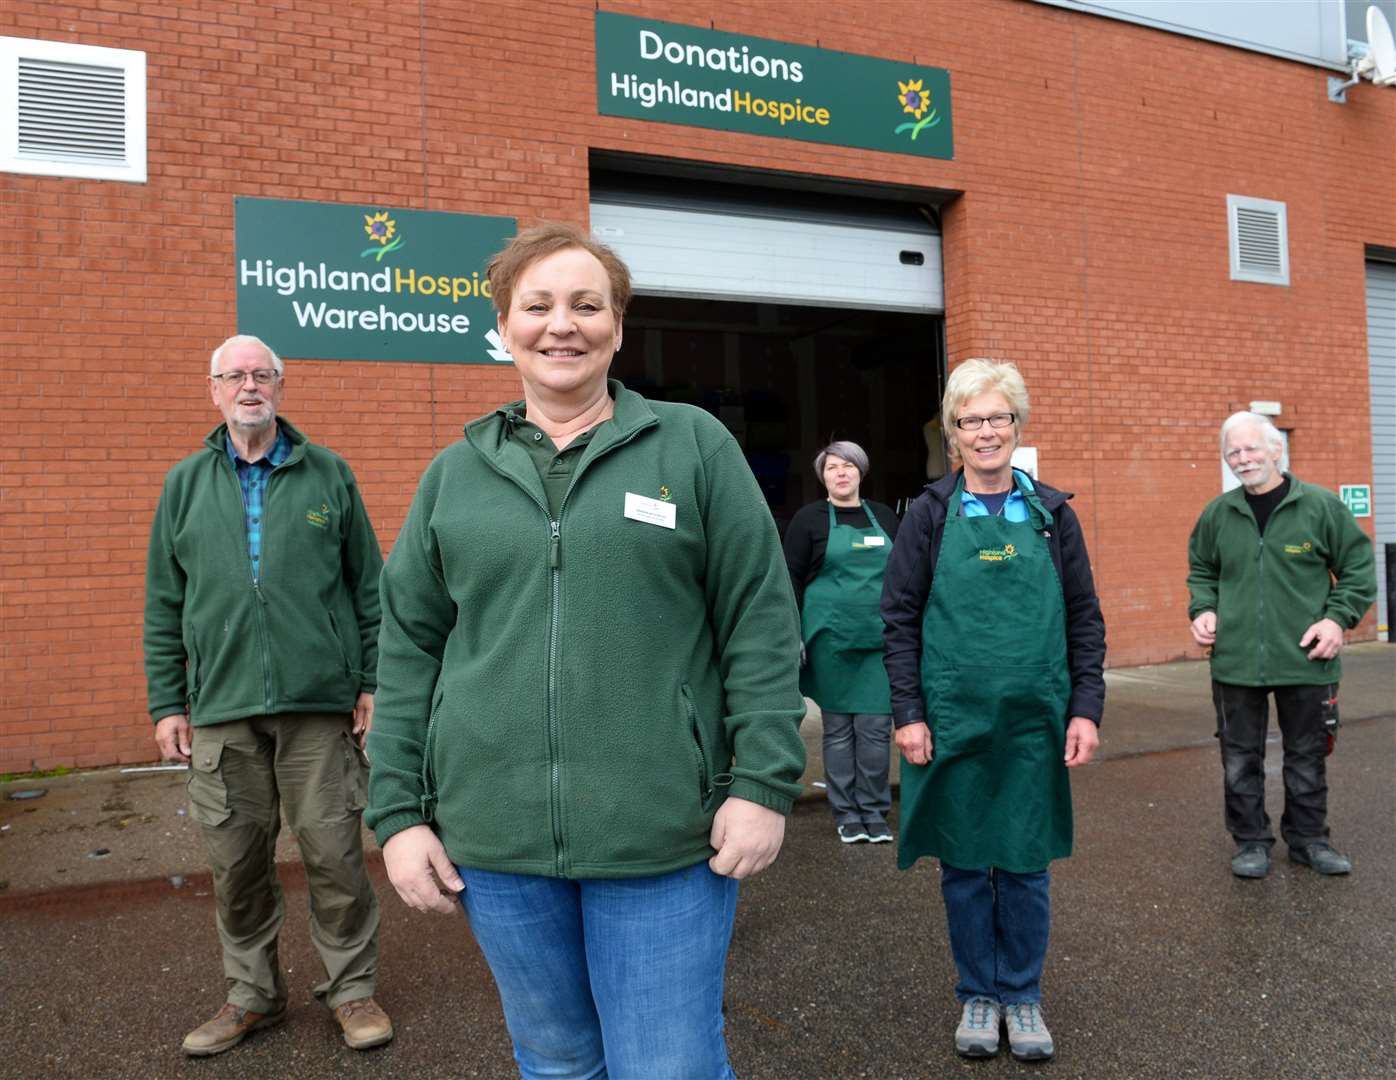 Highland Hospice Warehouse have launched a volunteer drive for the warehouse and charity shops. The warehouse team, from left, George Latham, Sandra Wilkinson, Emma Chiappa, Chris Magee and Tom Pearce. Picture: Gary Anthony